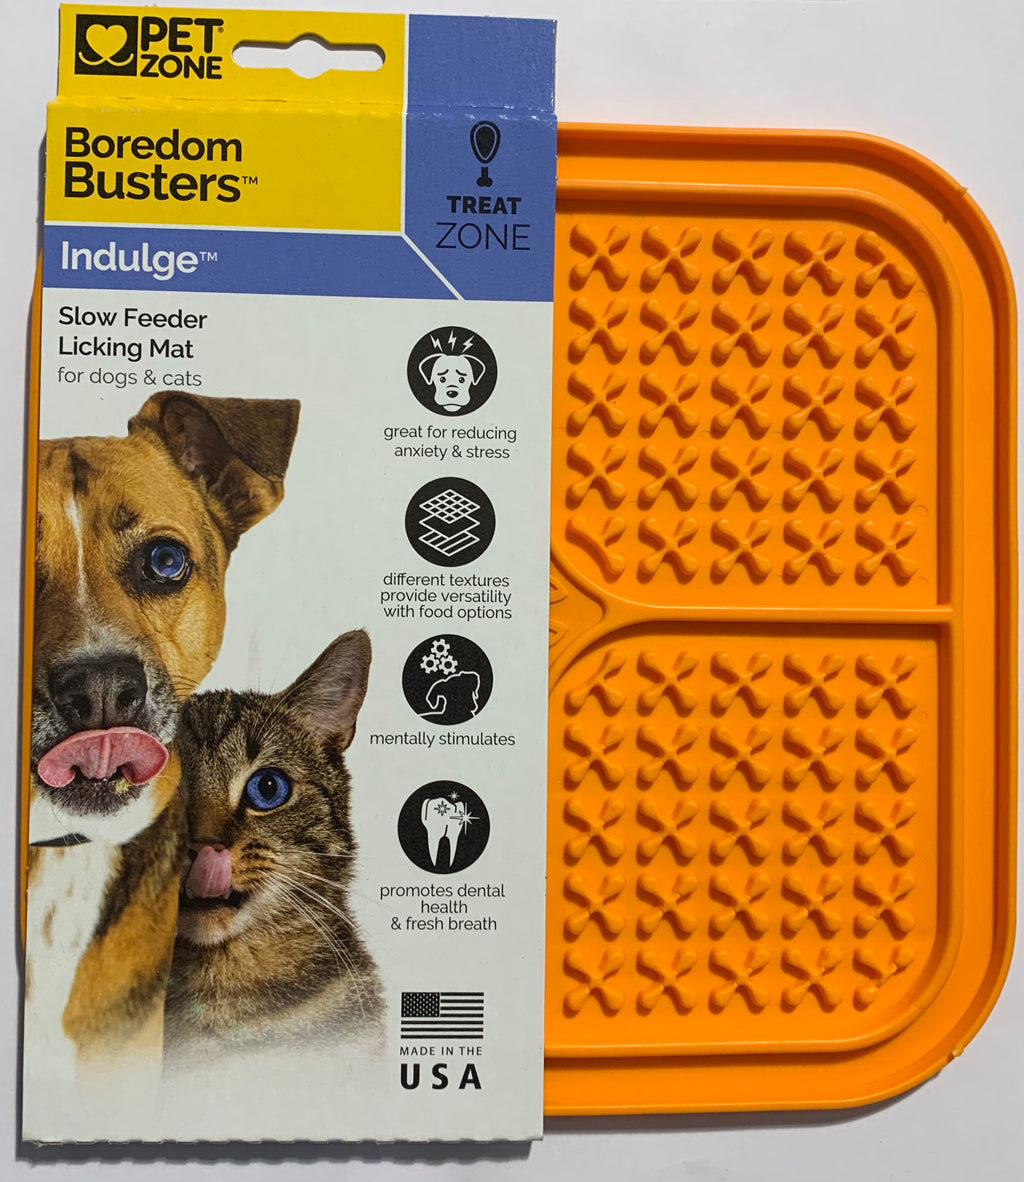 Pet Zone Boredom Busters Indulge Slow Feeder Licking Mat for Dogs & Cats